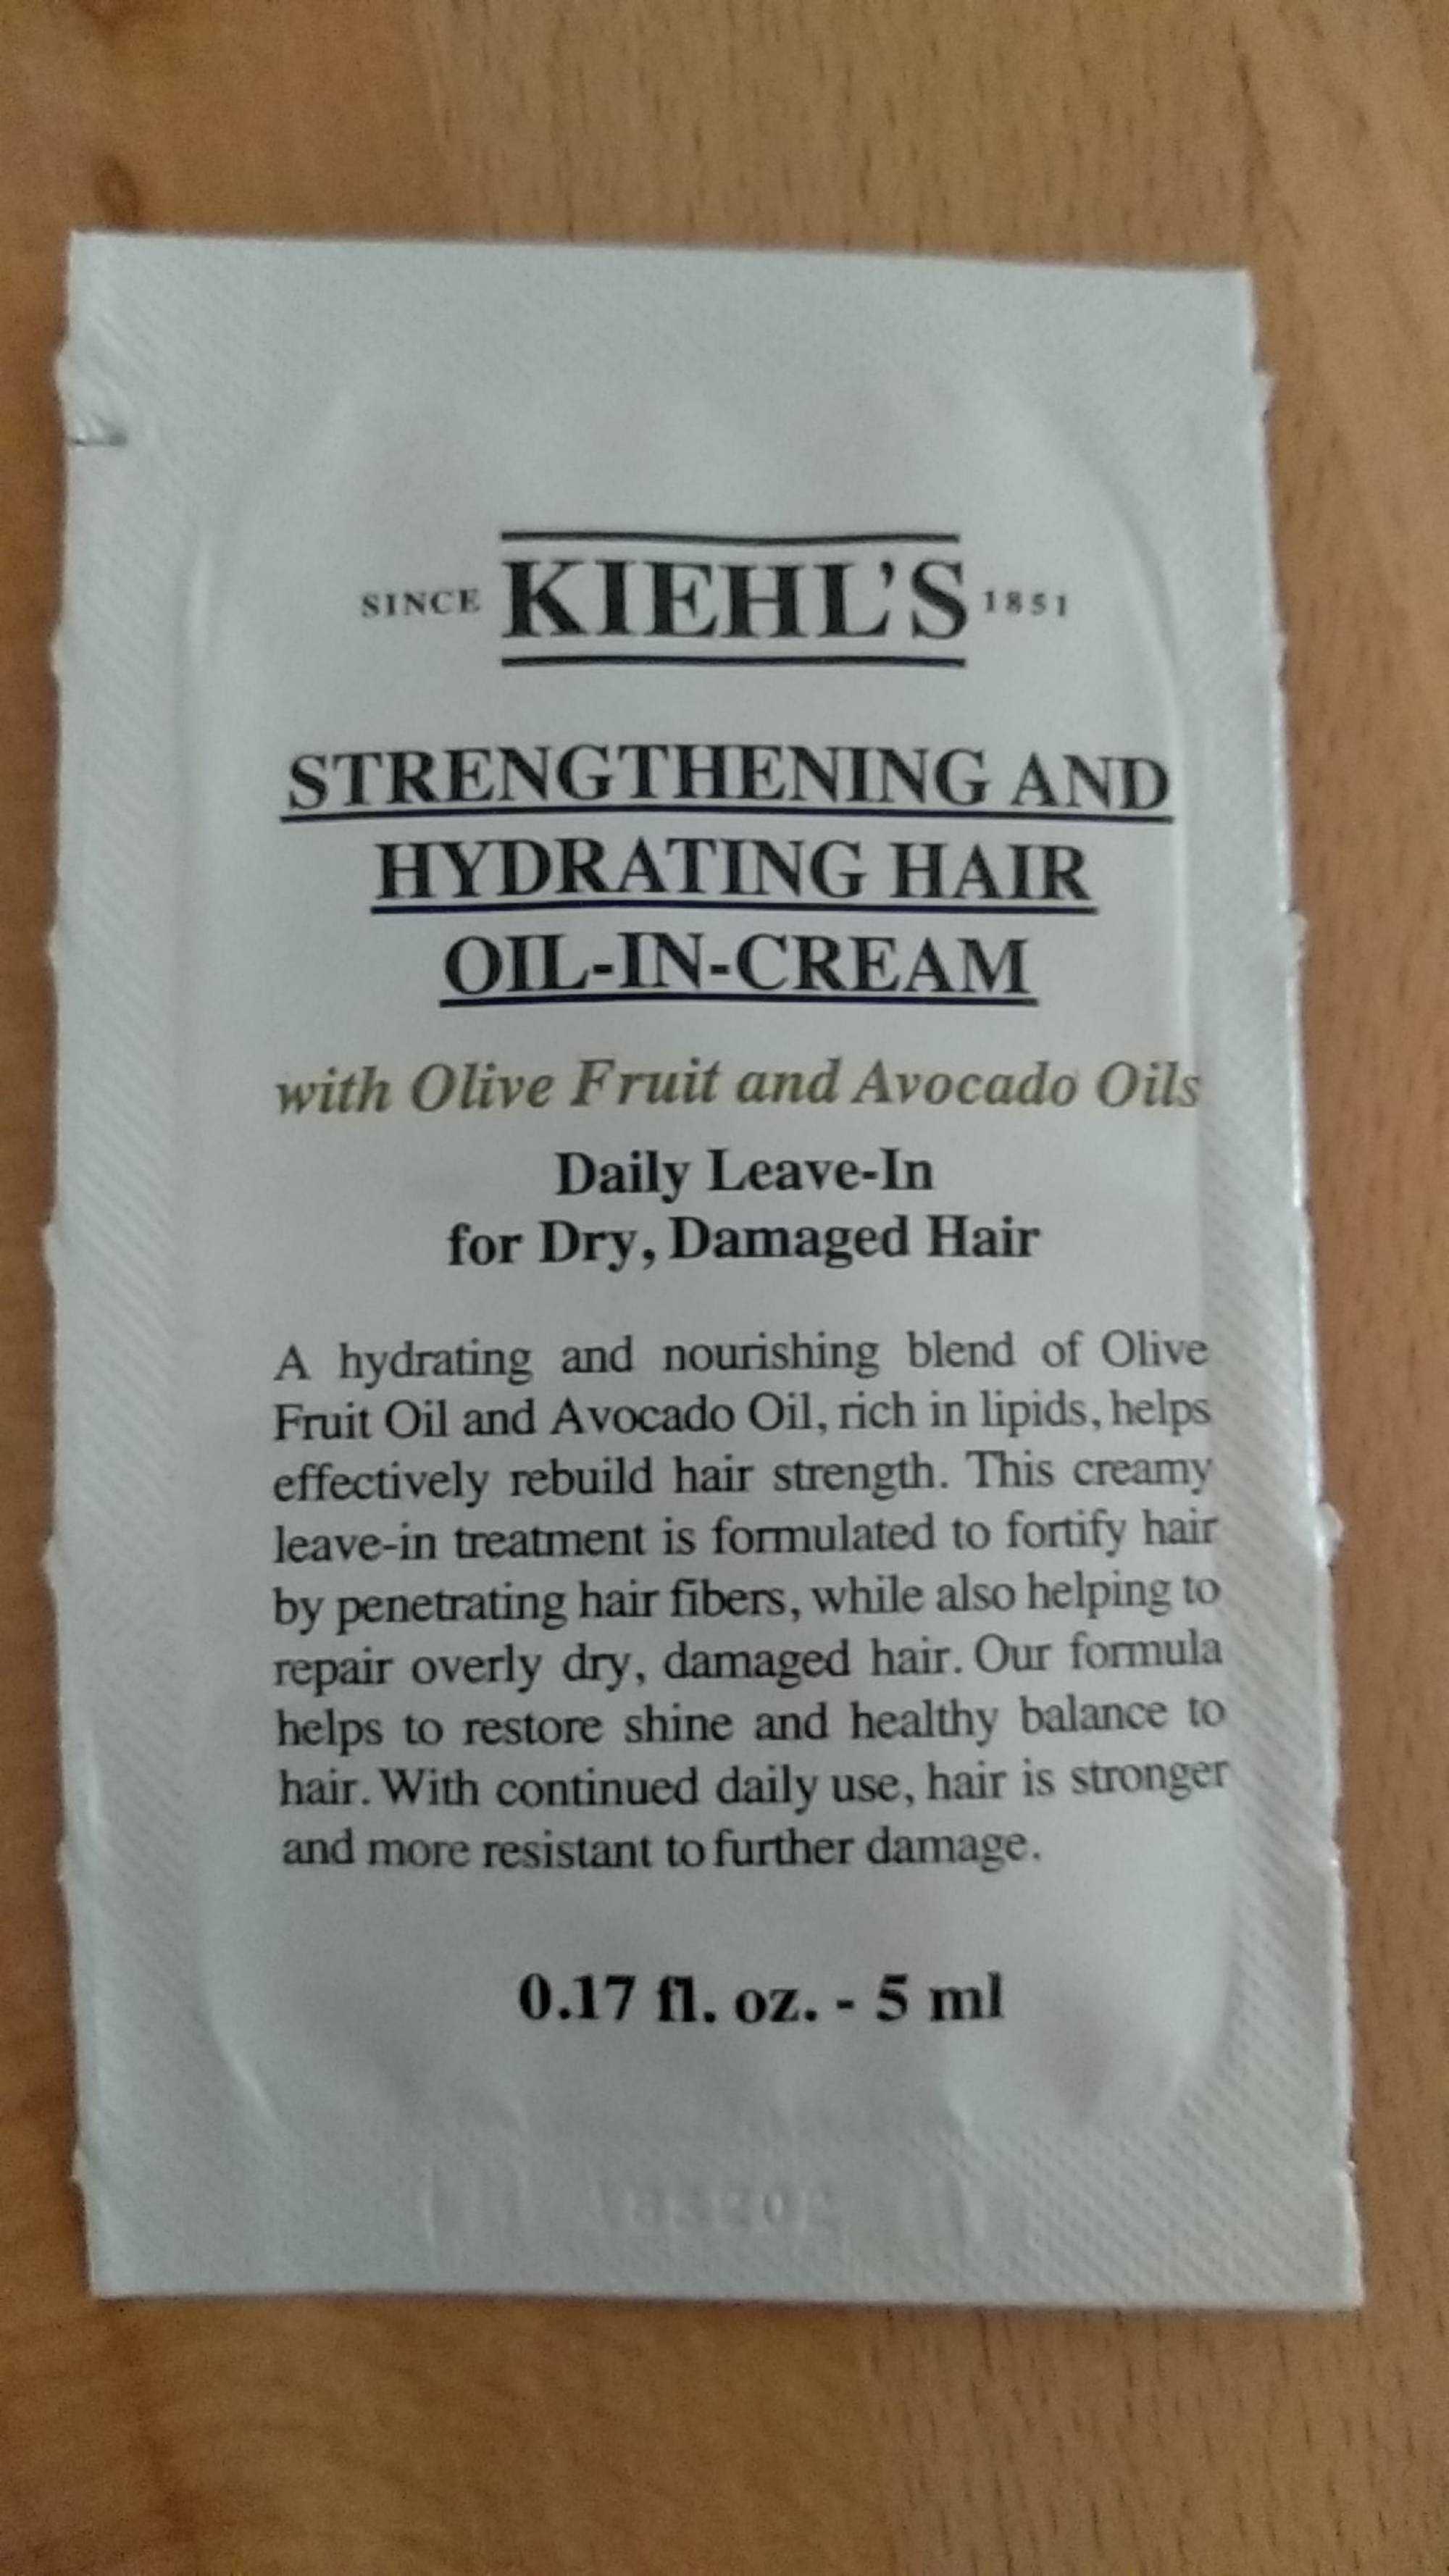 KIEHL'S - Strengthening and hydrating hair oil-in-cream